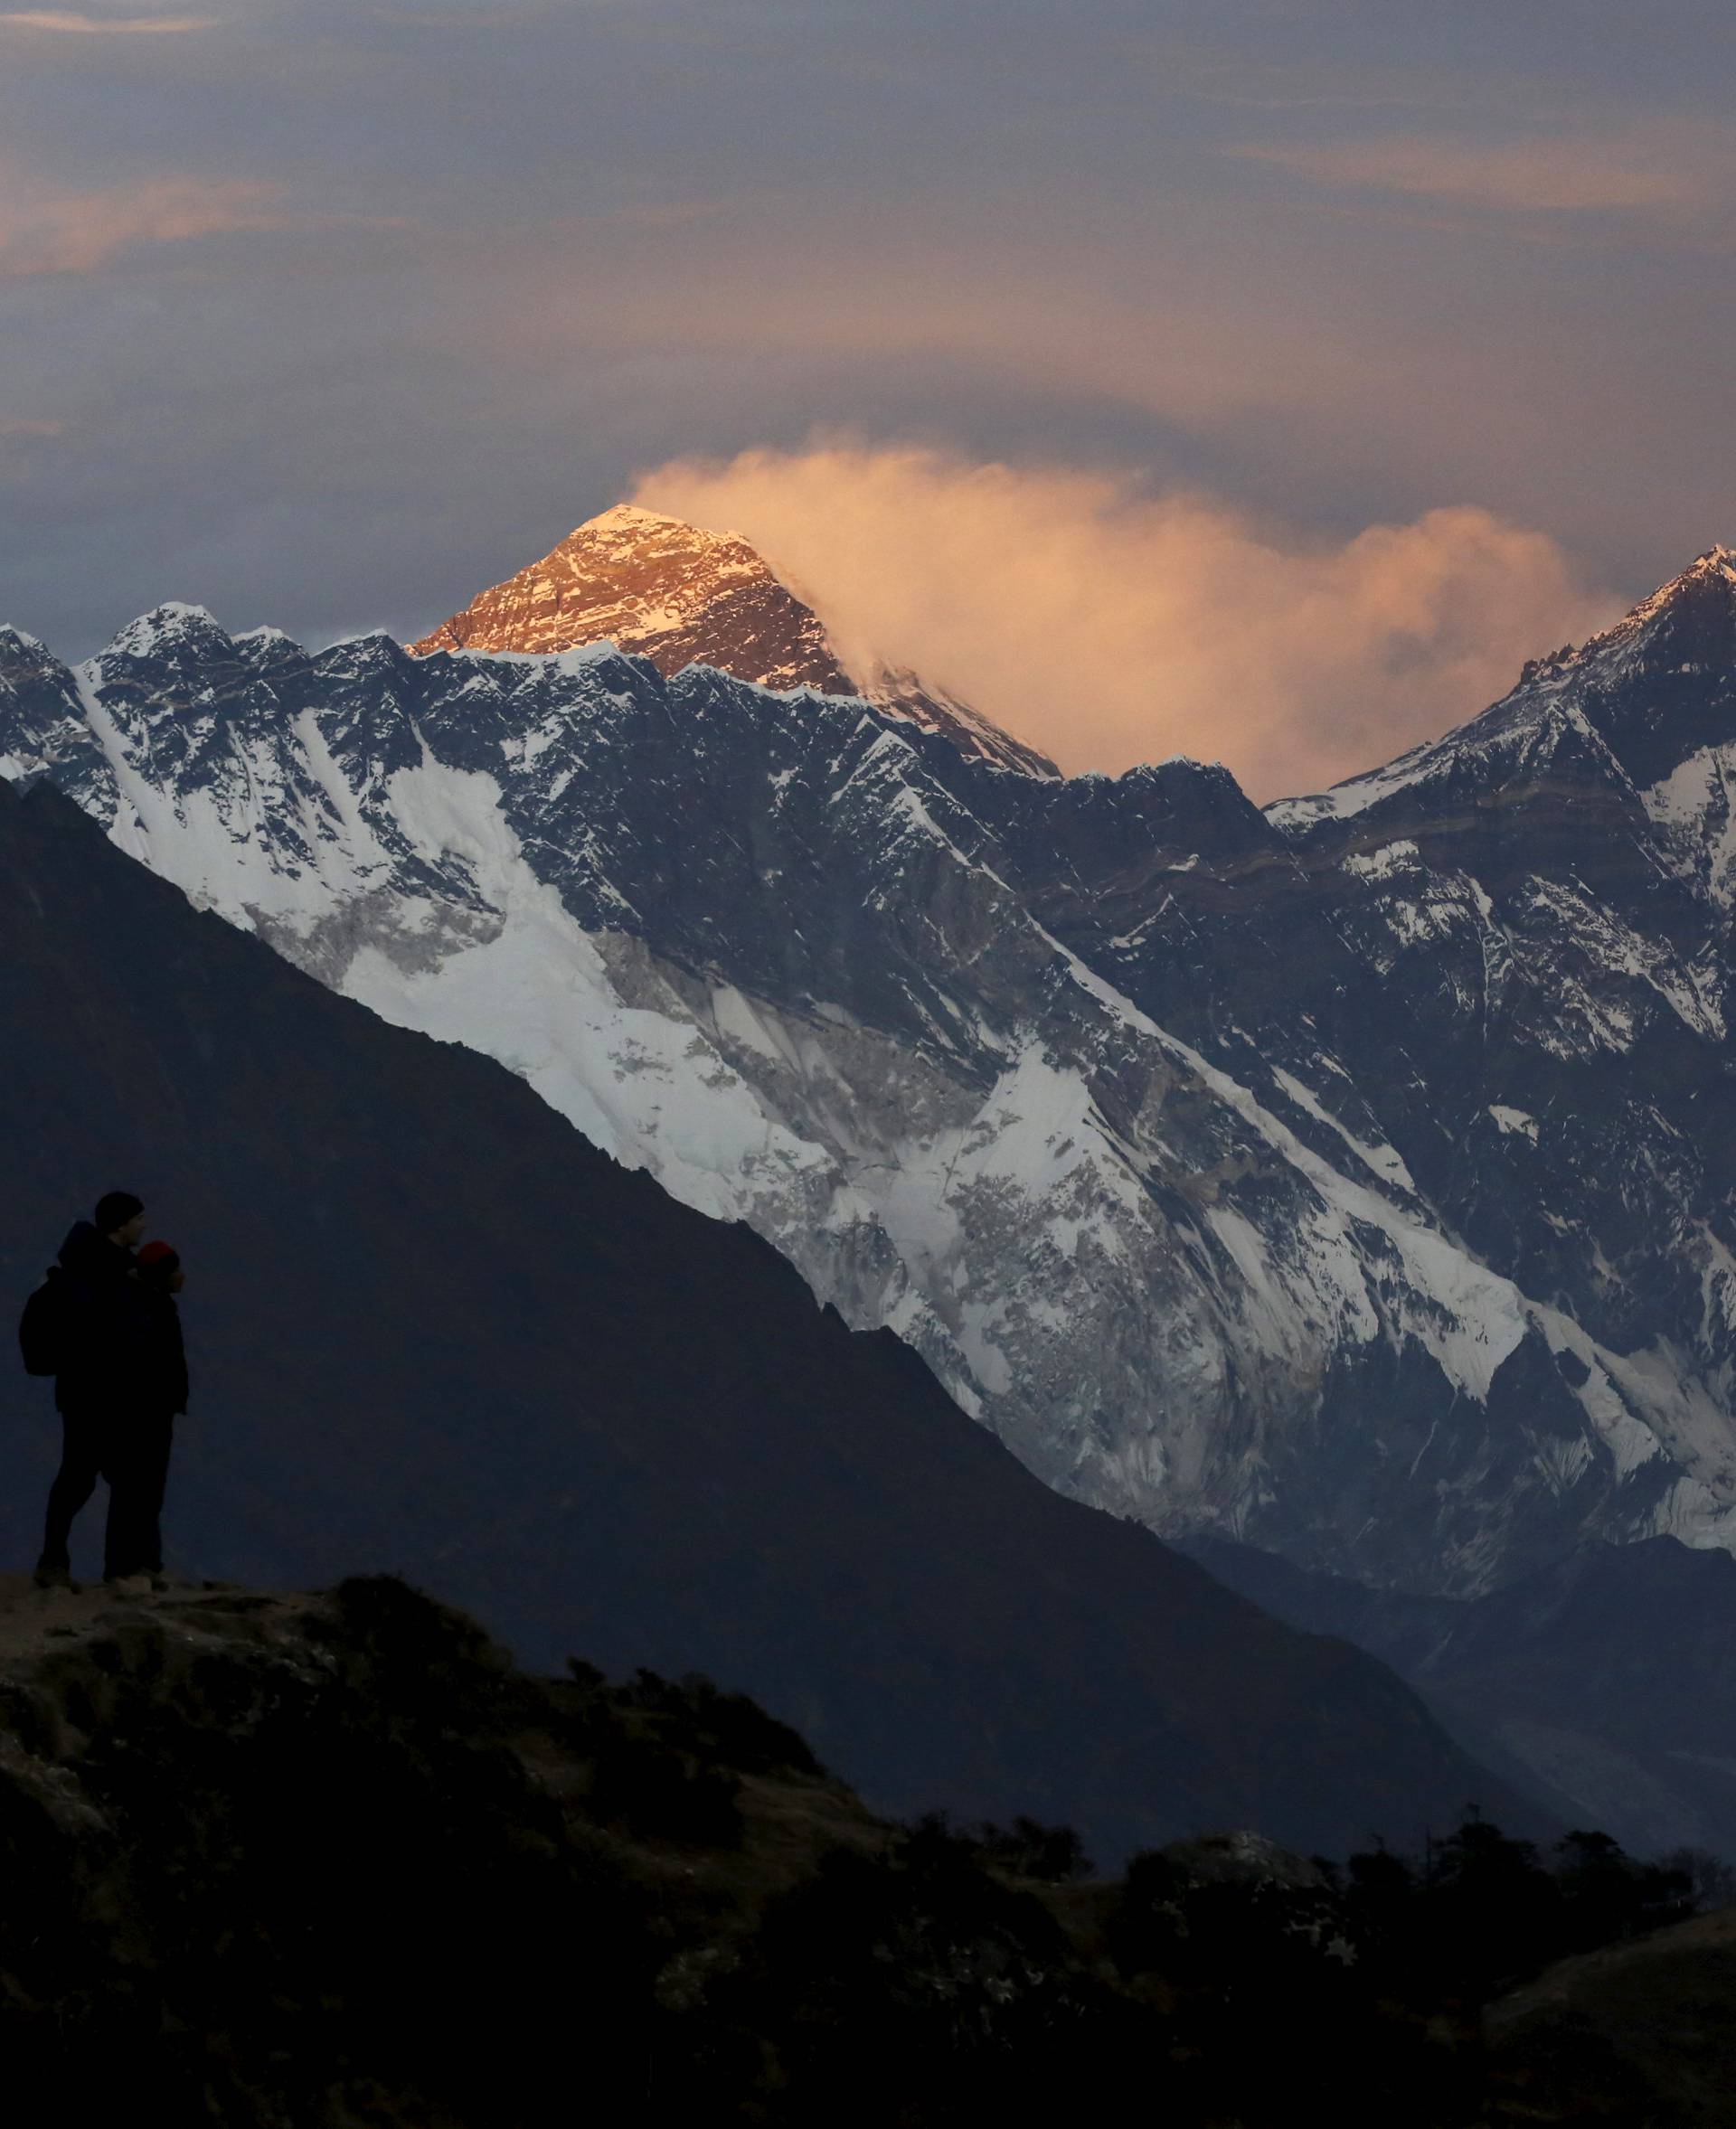 Light illuminates Mount Everest during sunset in Solukhumbu district also known as the Everest region